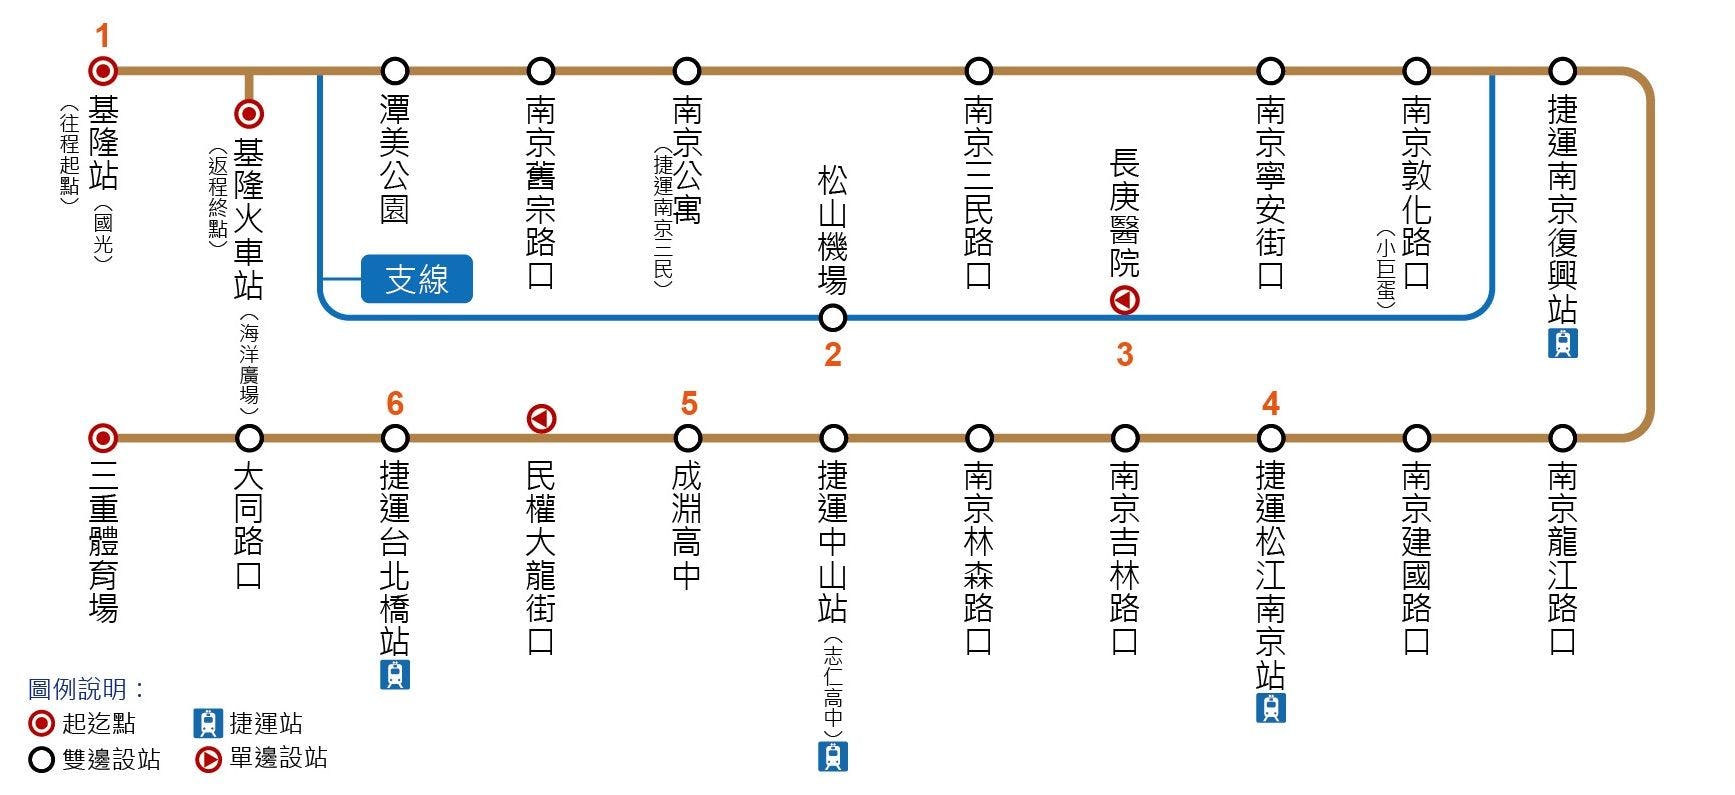 1802Route Map-Kuo-Kuang Bus